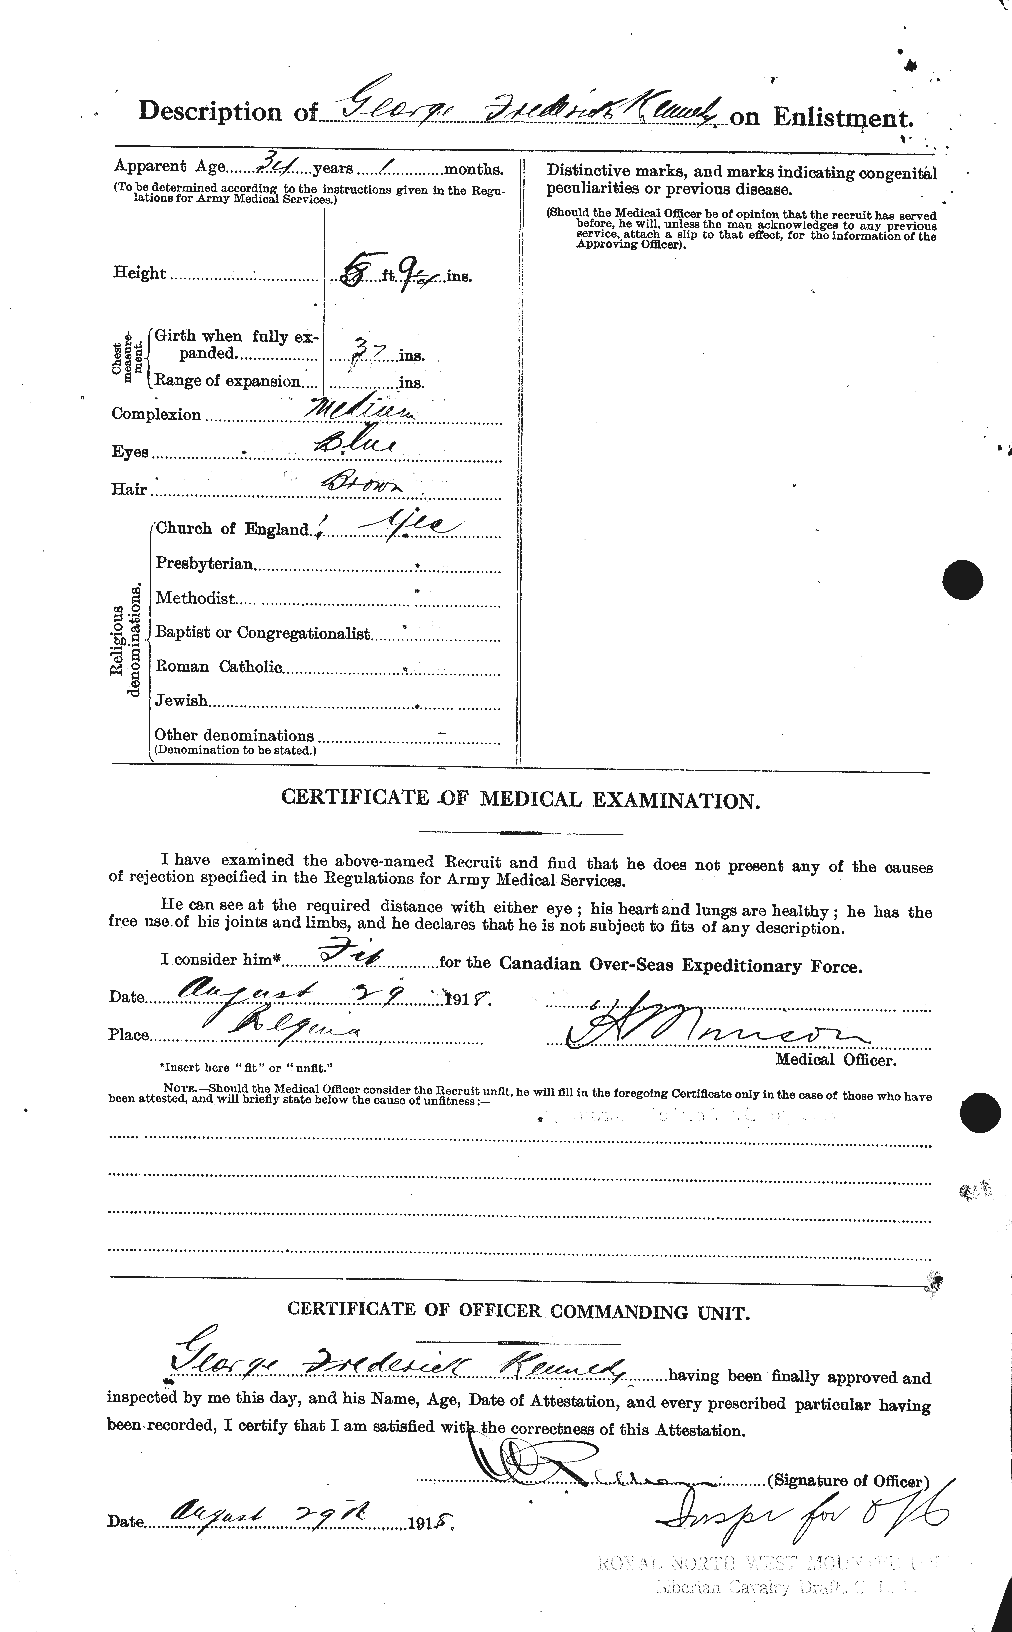 Personnel Records of the First World War - CEF 428794b